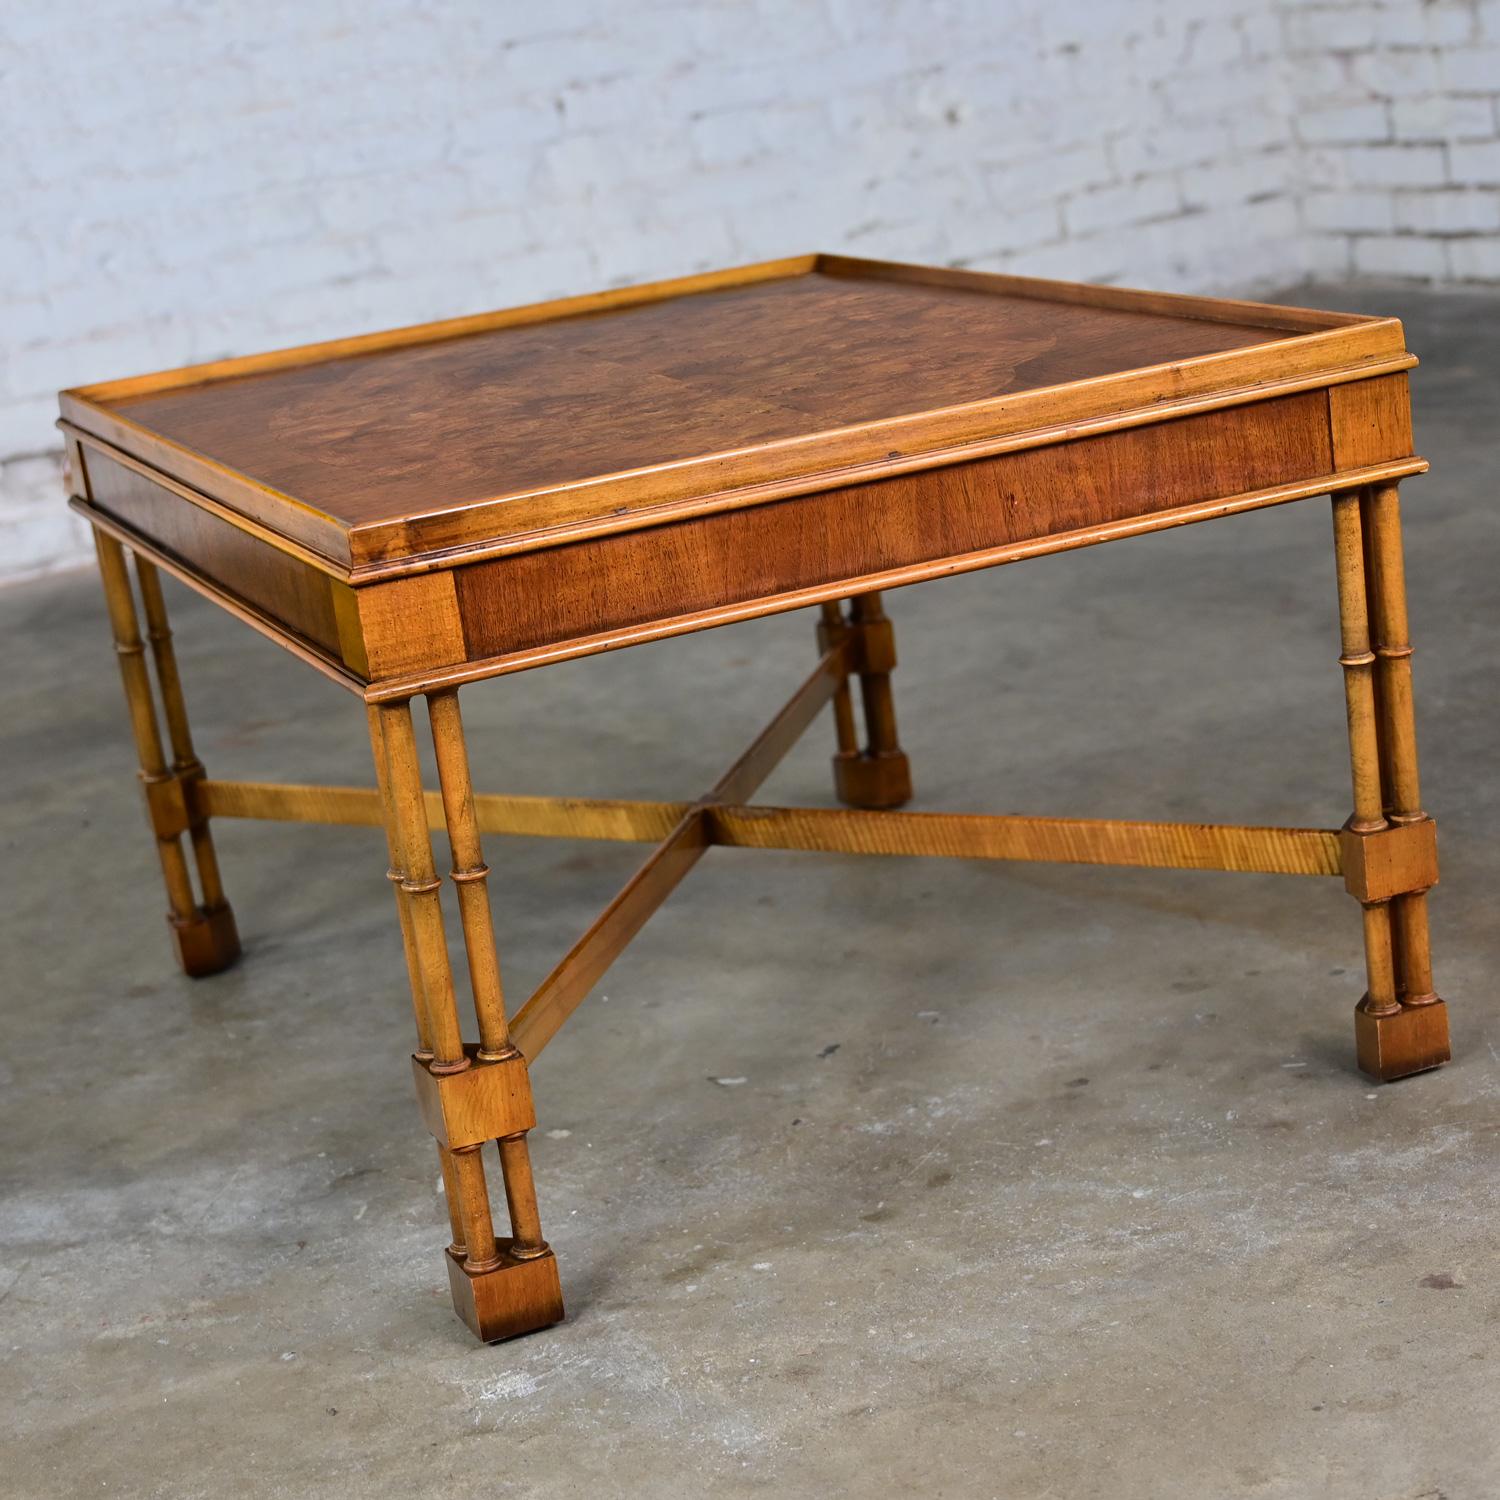 Handsome Mid-Late 20th Century Baker Furniture Campaign style rectangular end table comprised of walnut & mahogany veneer, burlwood top, triple cane faux bamboo legs, and X cross-stretcher. Beautiful condition, keeping in mind that this is vintage